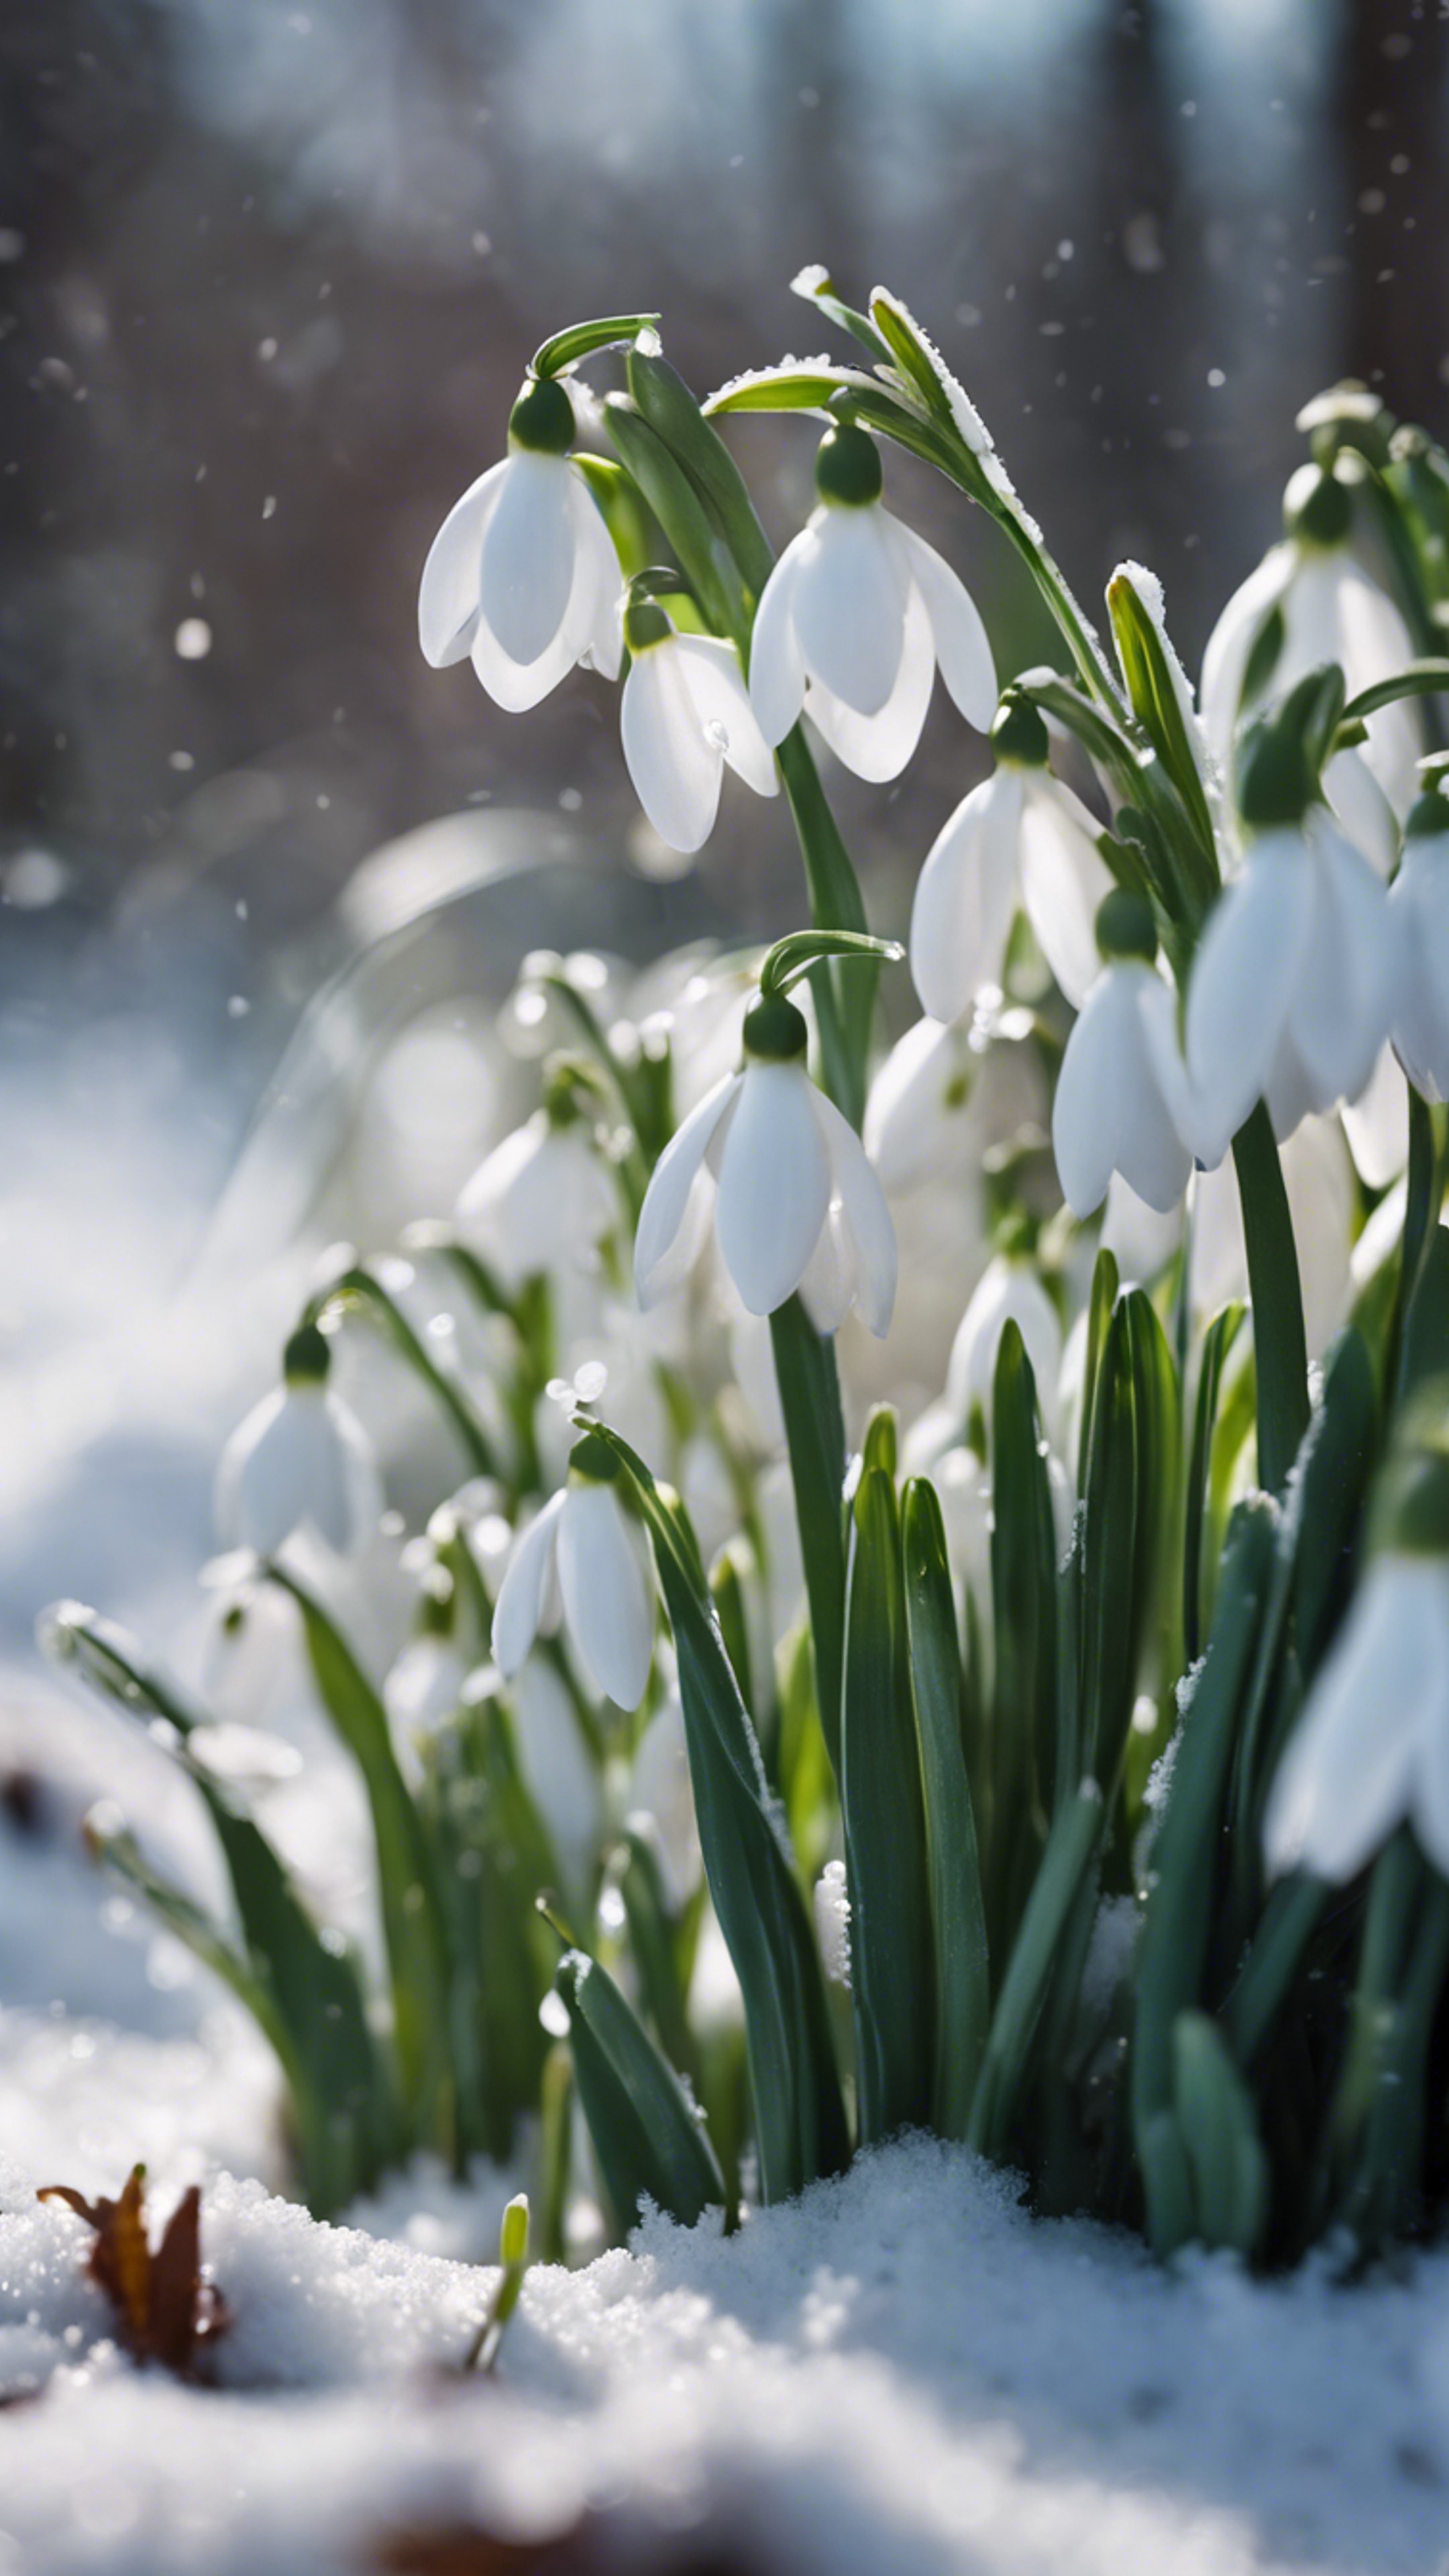 A patch of white snowdrops peeking through a dusting of late spring snow. Tapeta[e64c535efd0a459c9840]